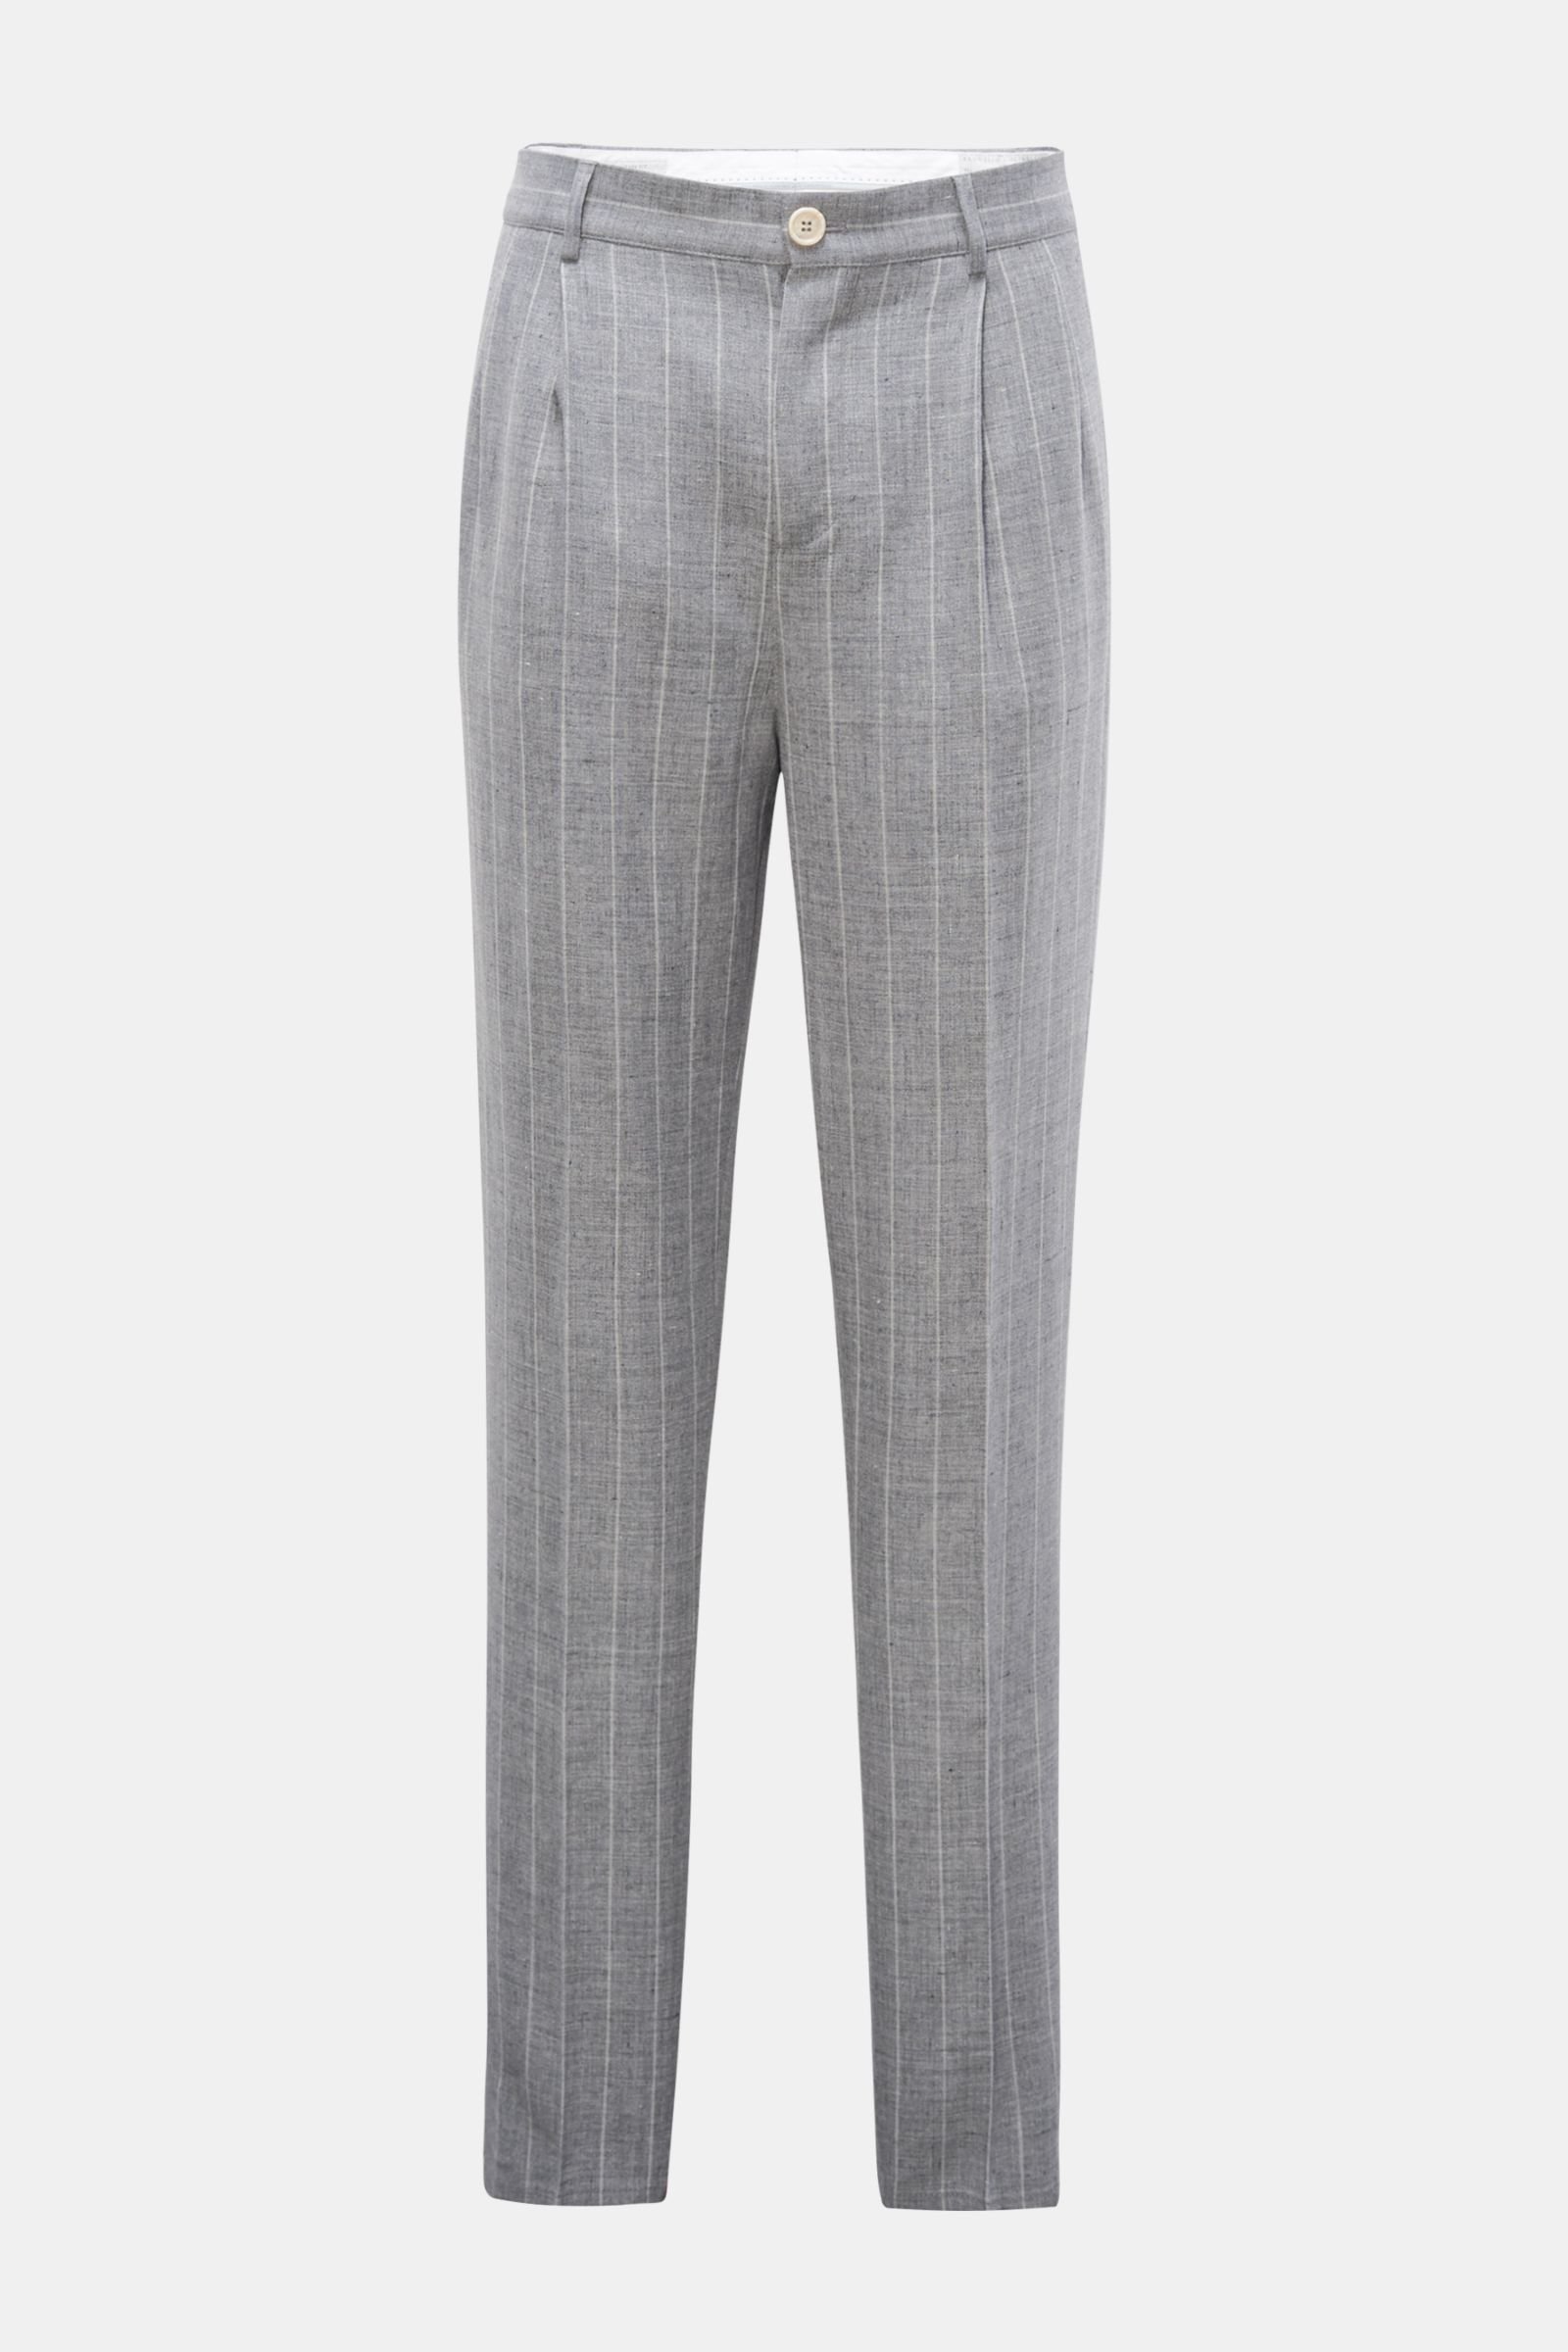 Trousers 'Easy Fit' grey/light grey striped